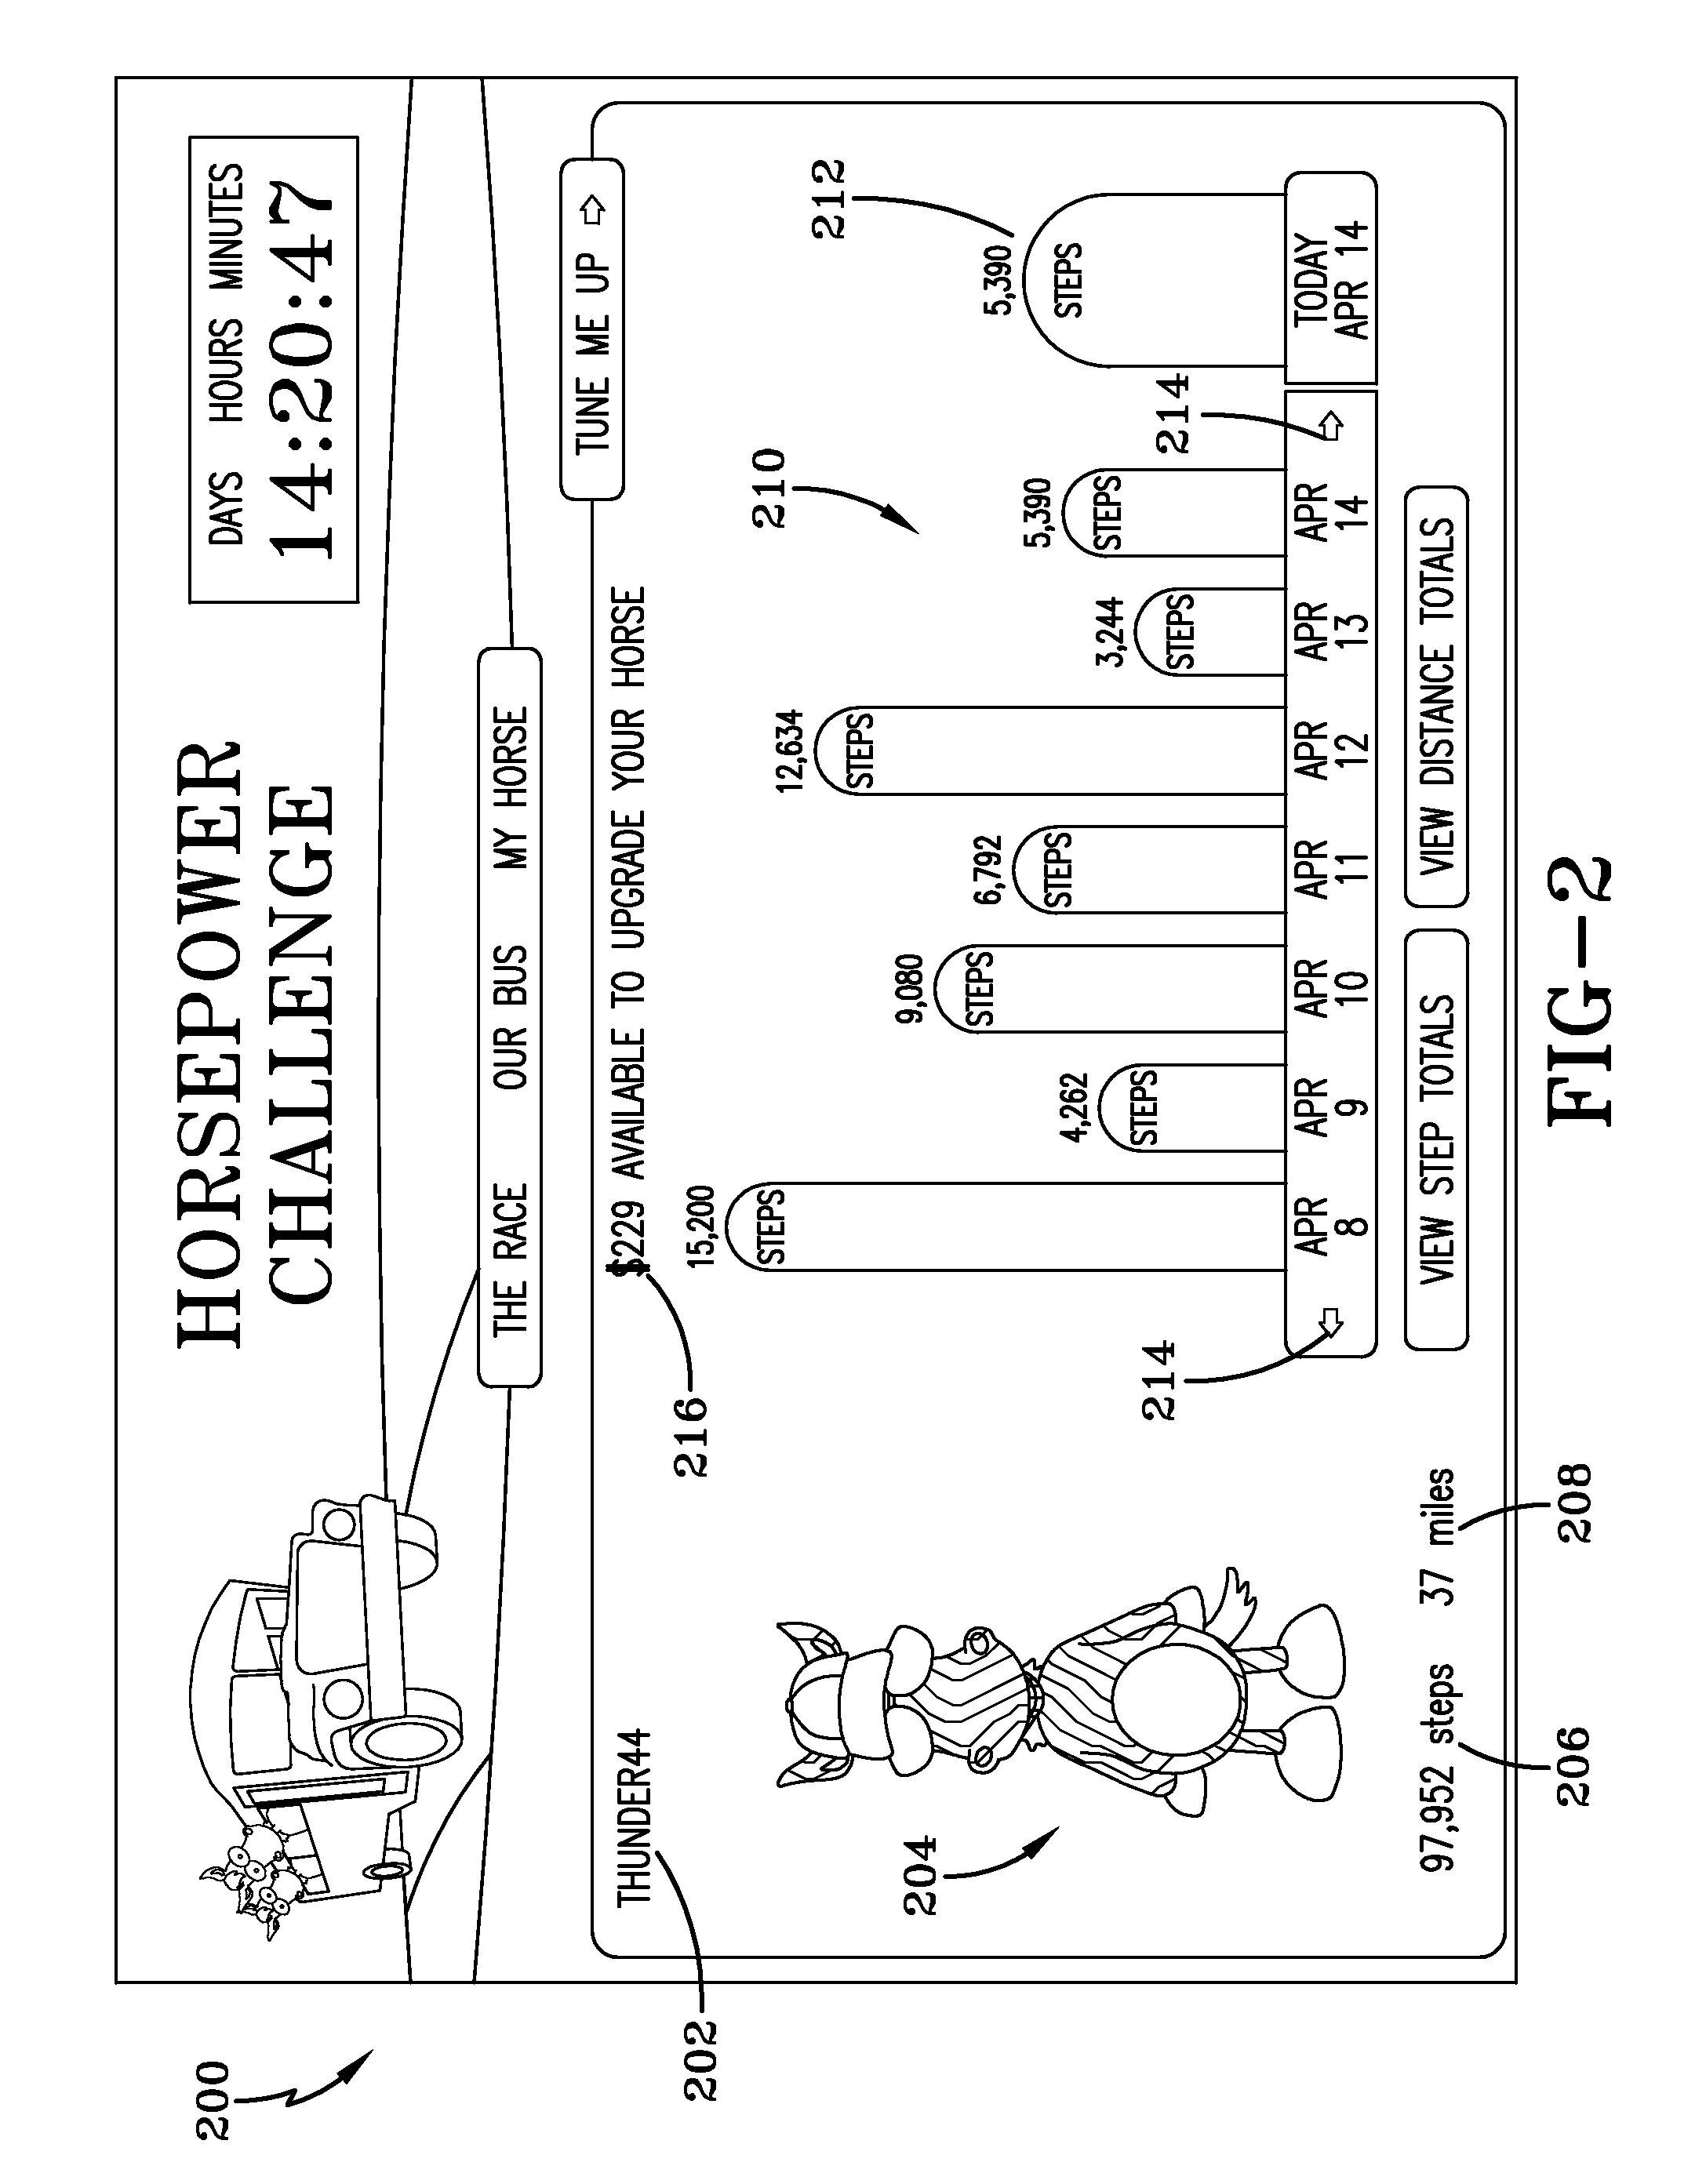 Team-based fitness challenge system and method